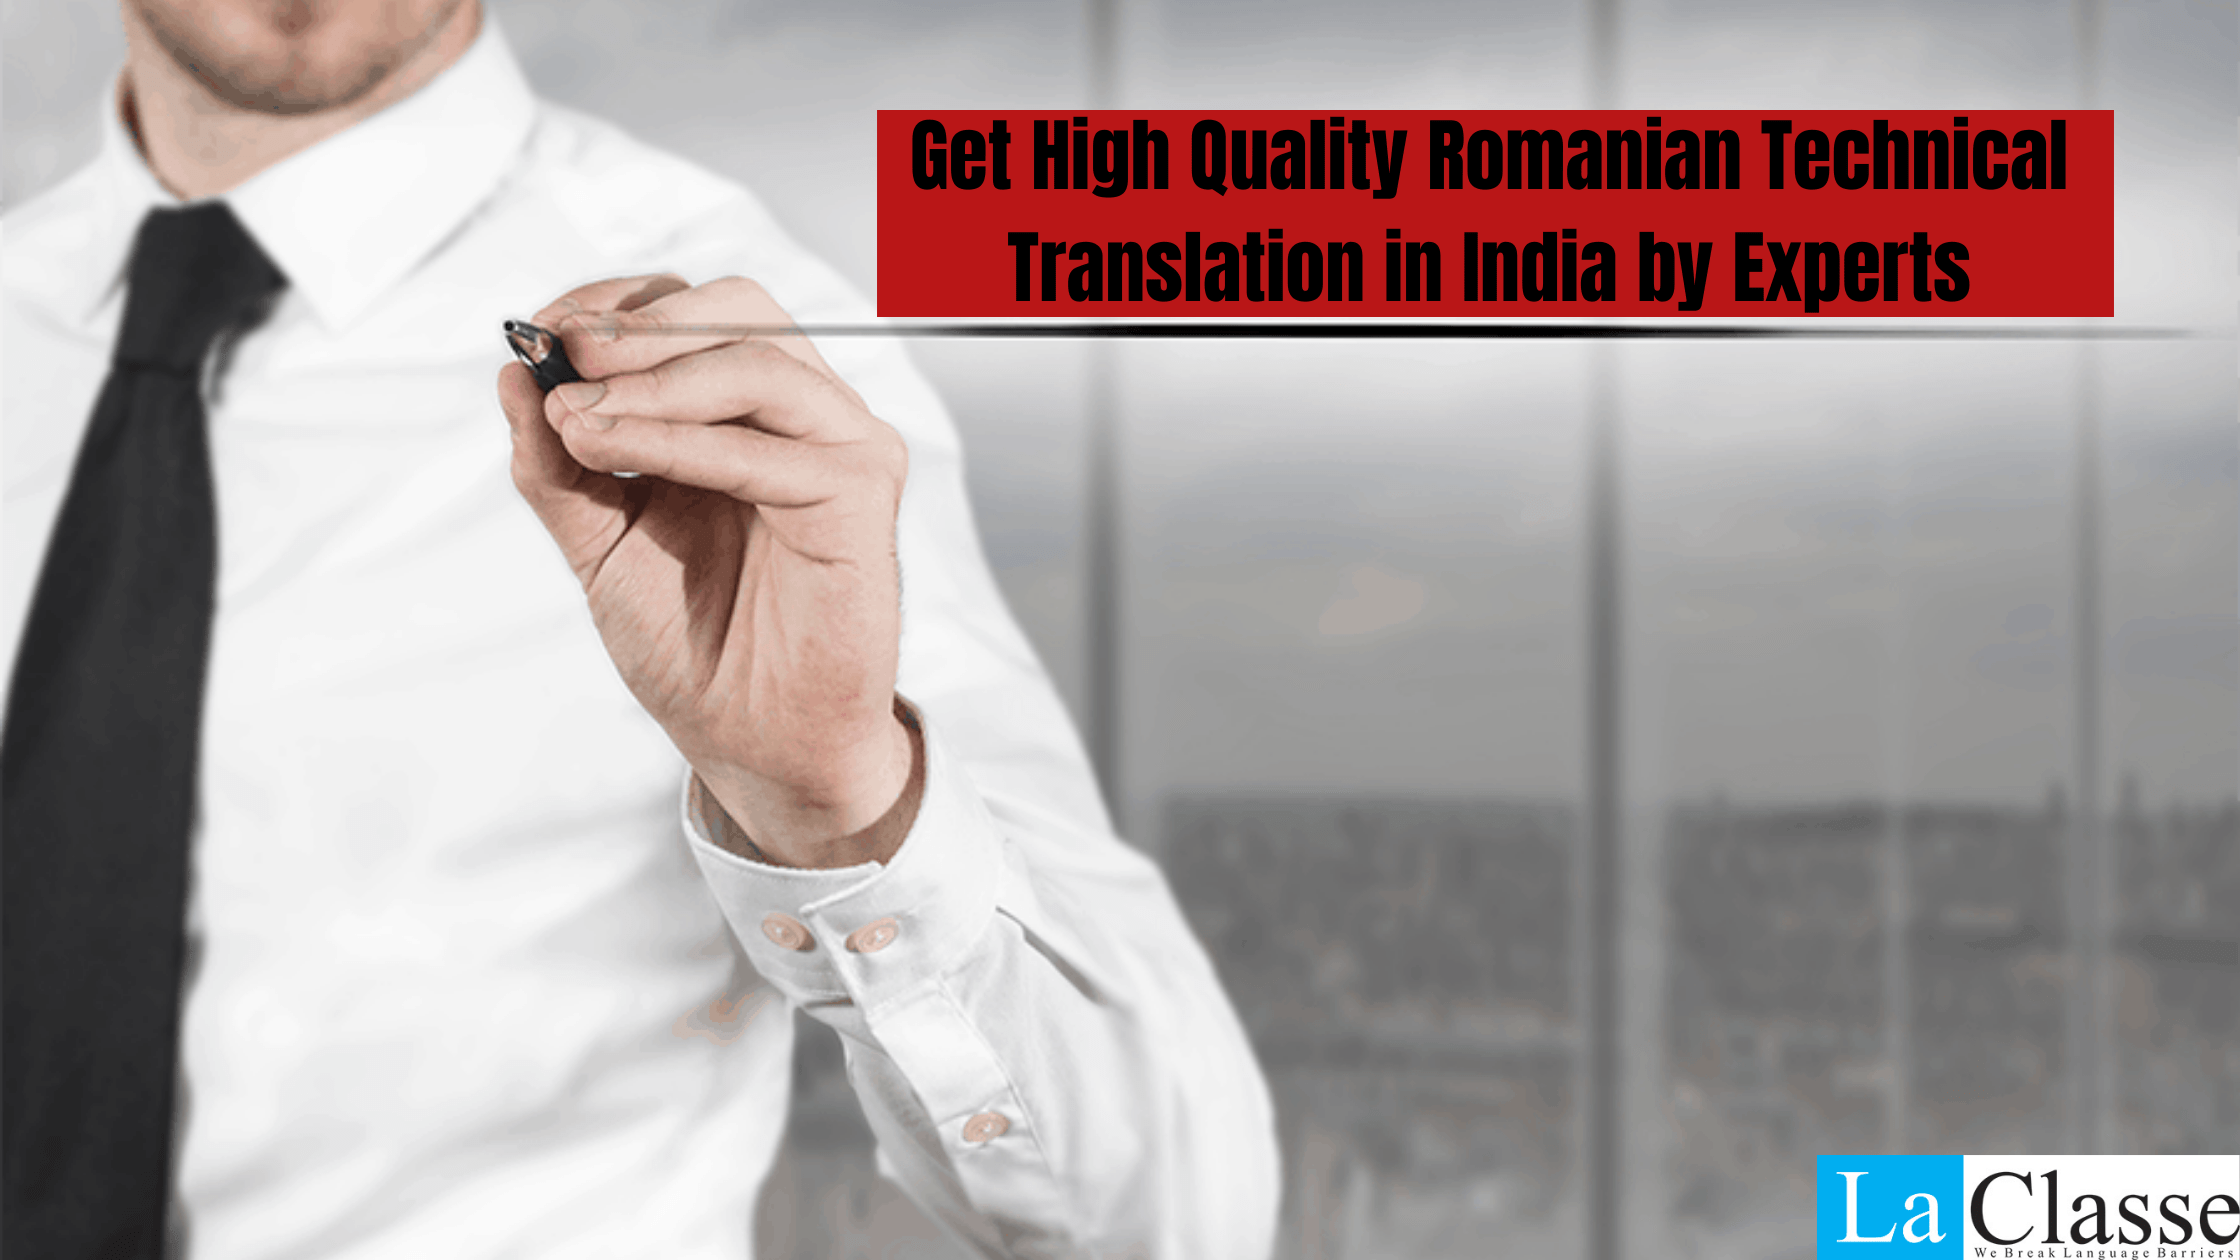 Romanian Technical Translation Services in India